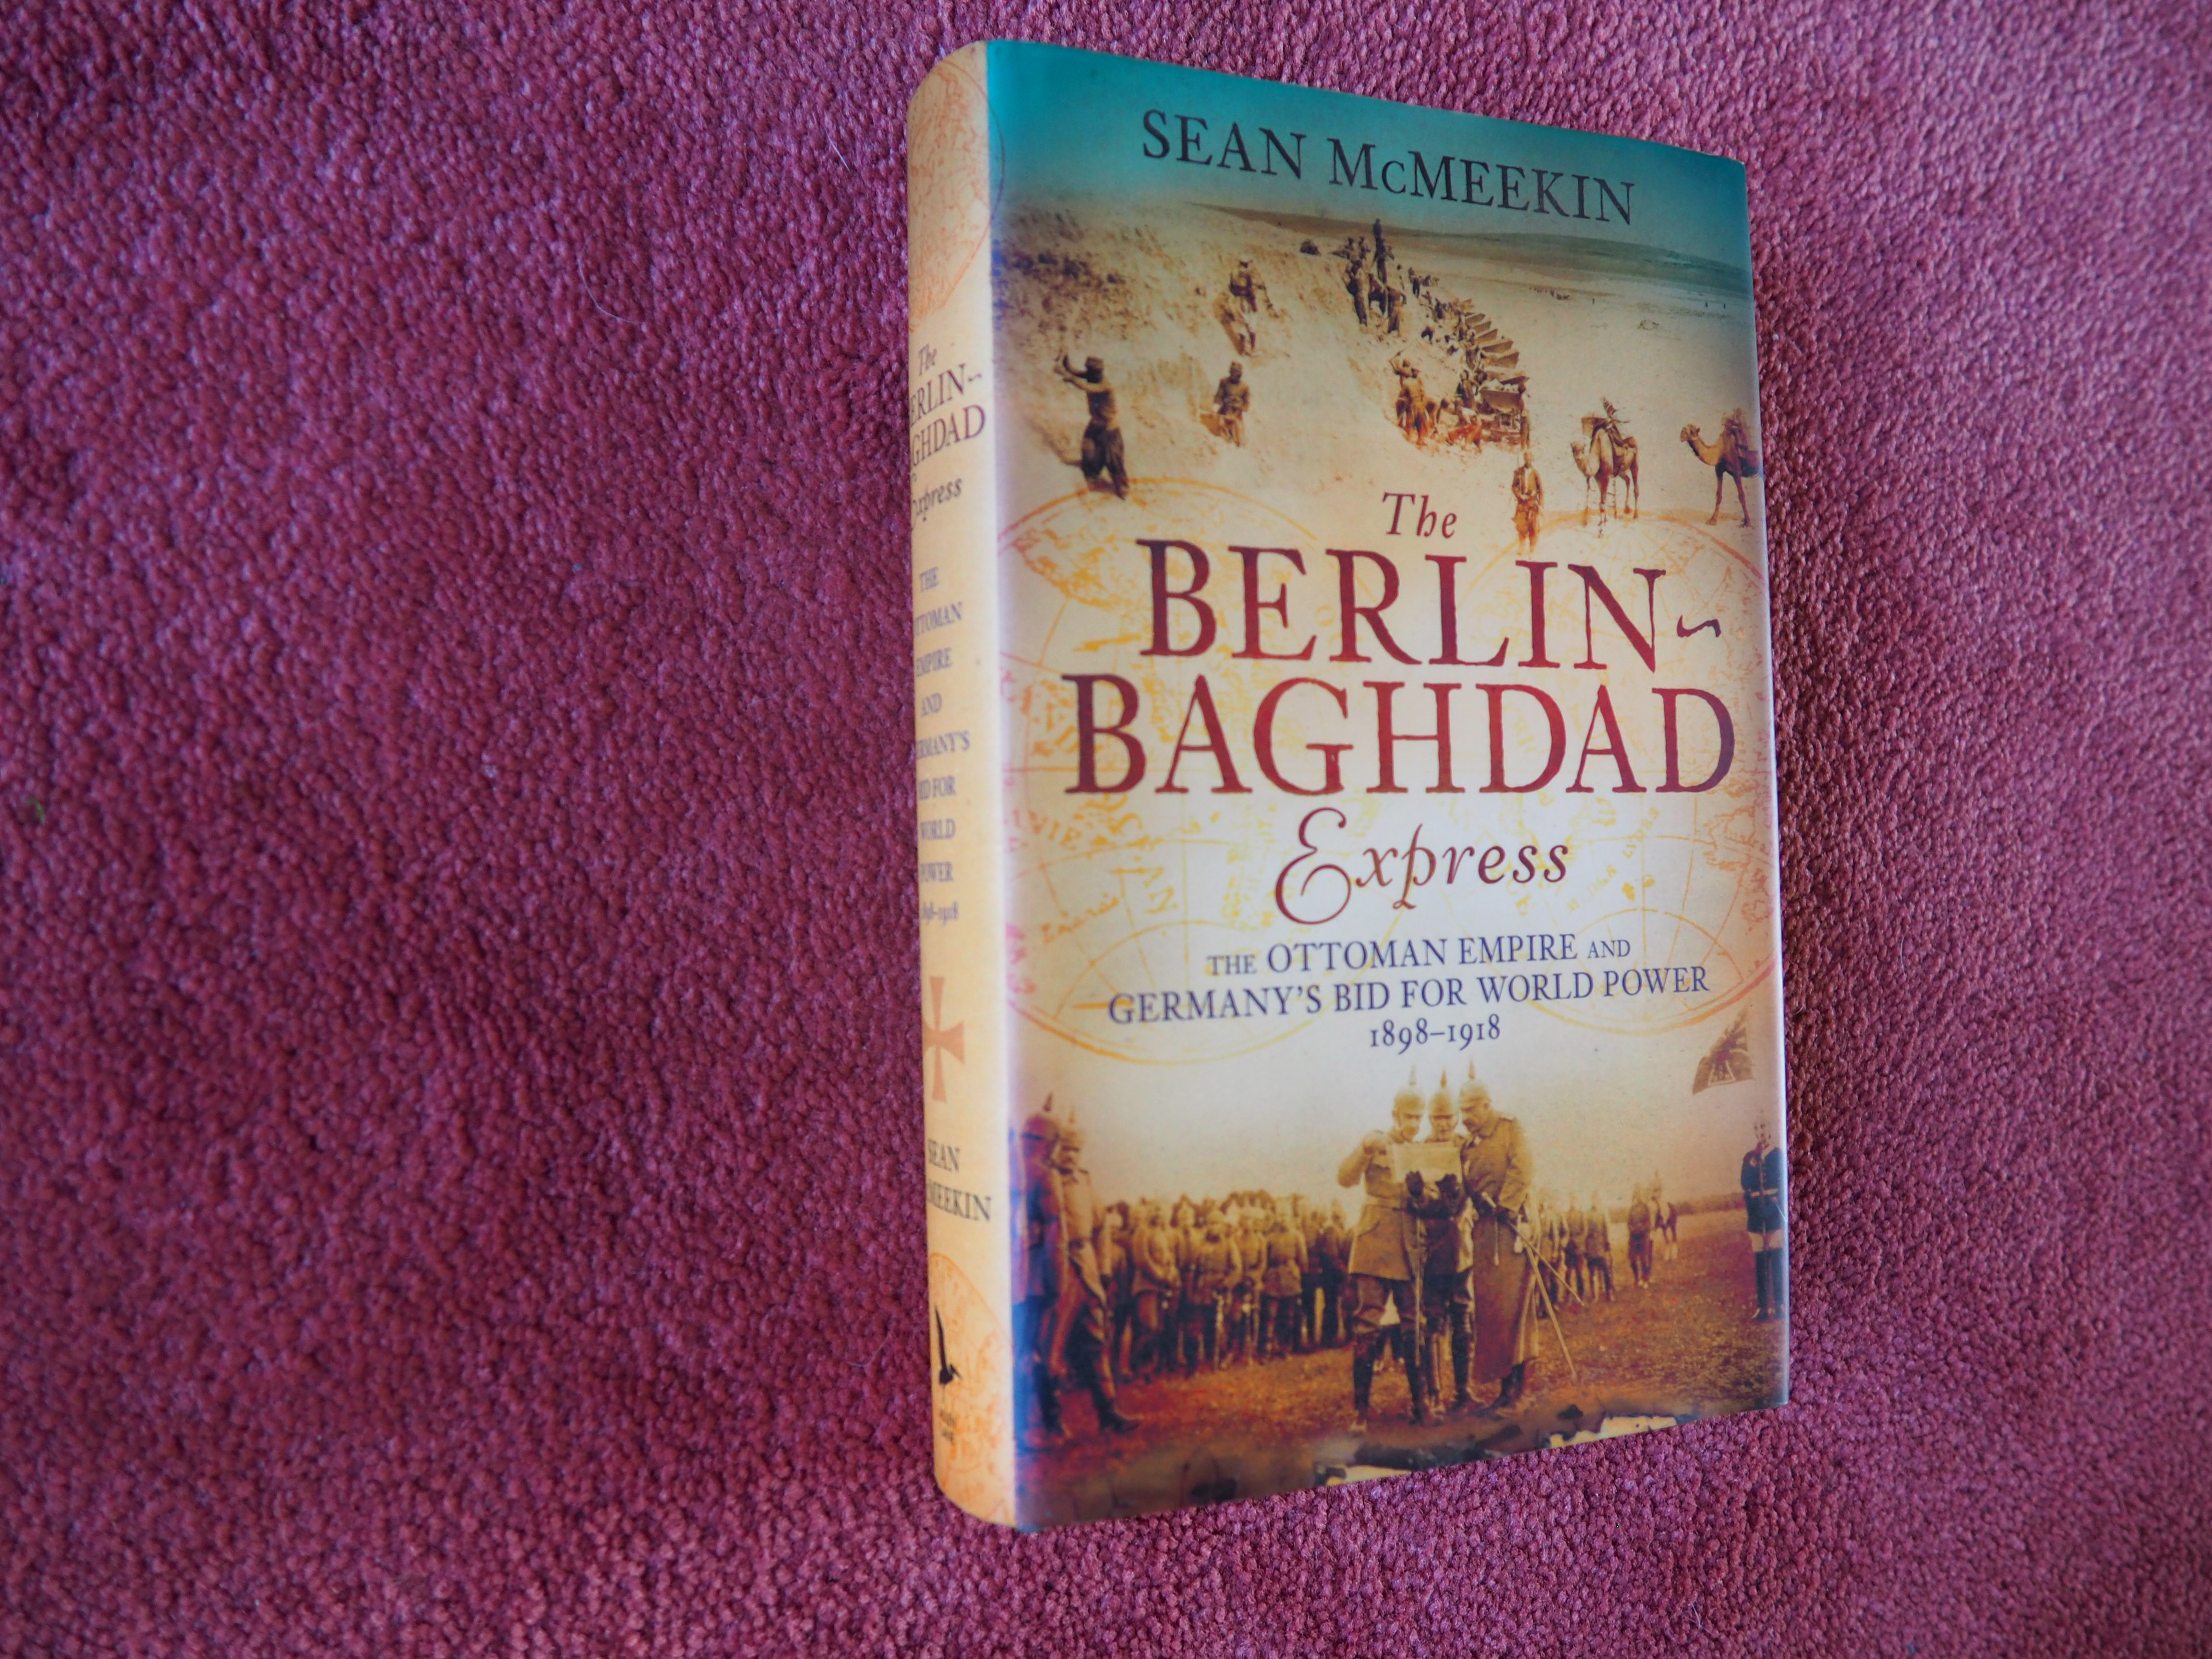 THE BERLIN BAGHDAD EXPRESS - The Ottoman Empire and Germany's Bid for World Power 1898-1918 - SEAN McMEEKIN